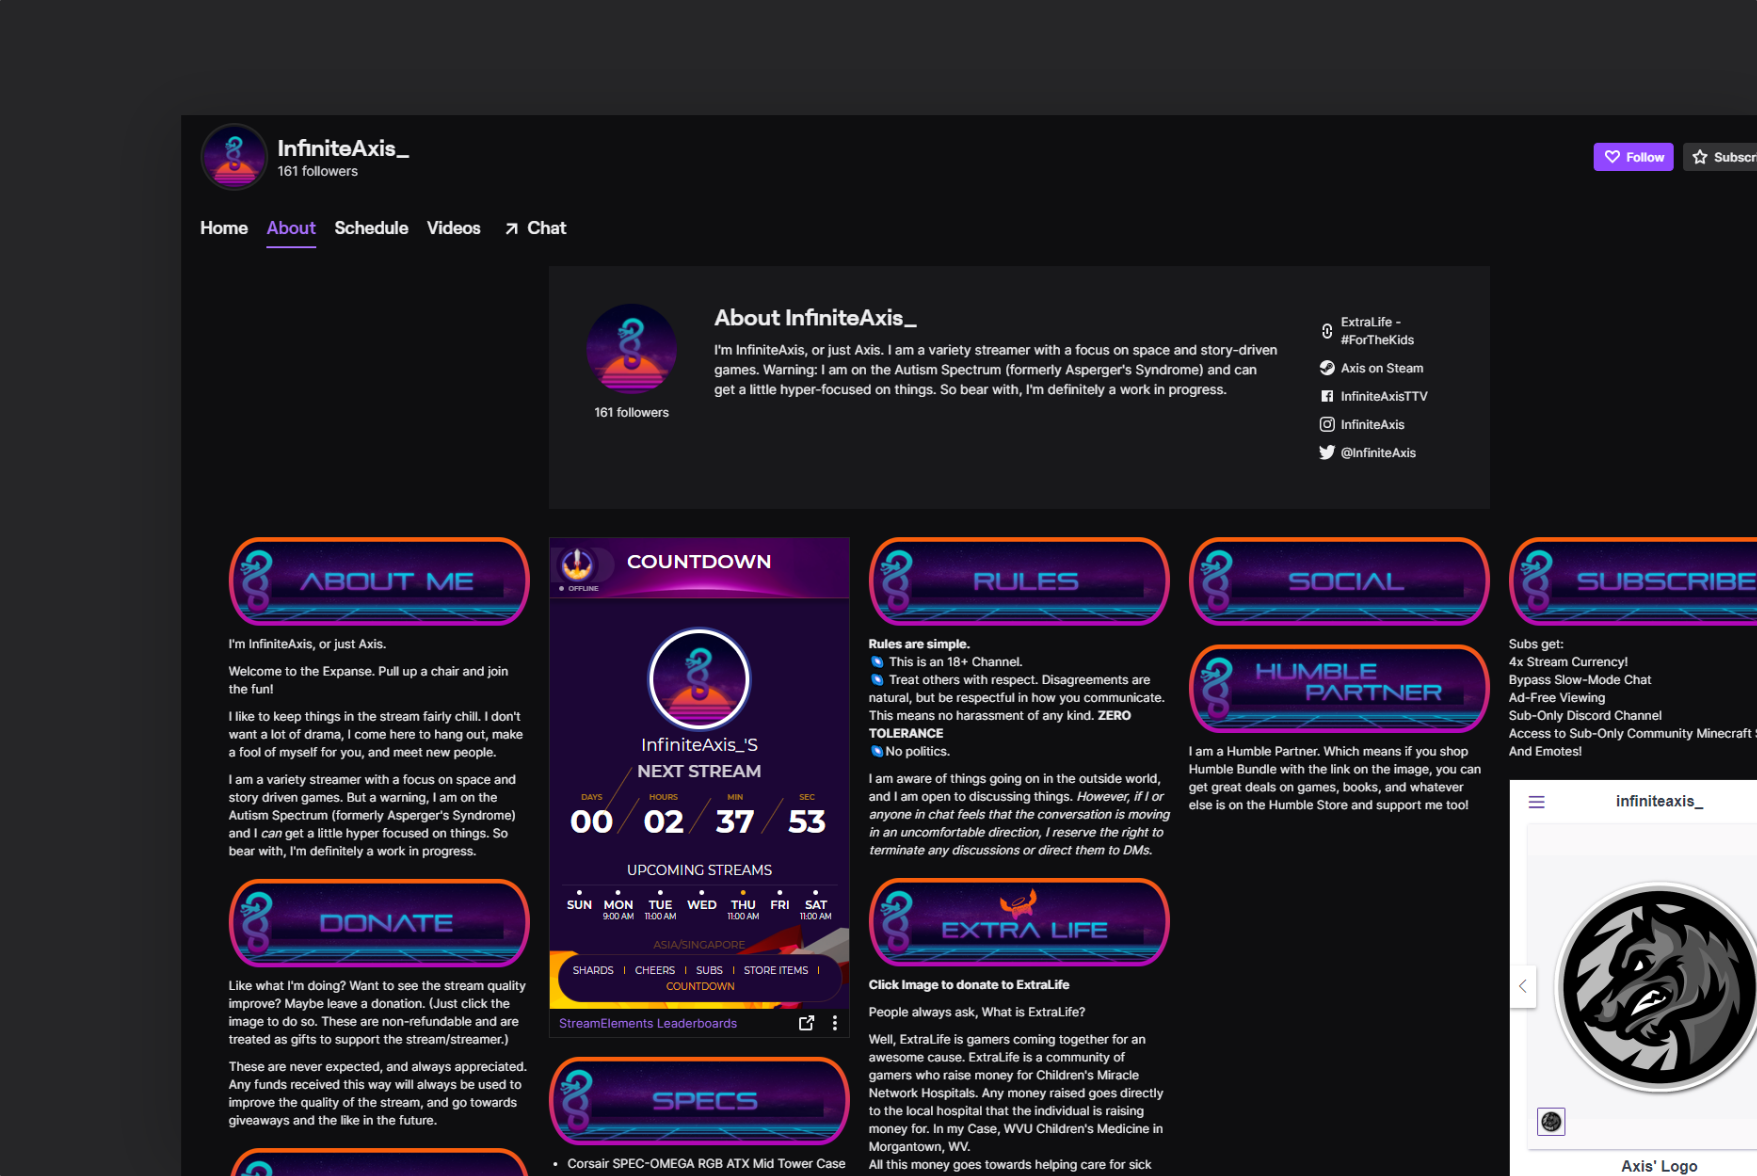 The About page on InfiniteAxis' twitch channel